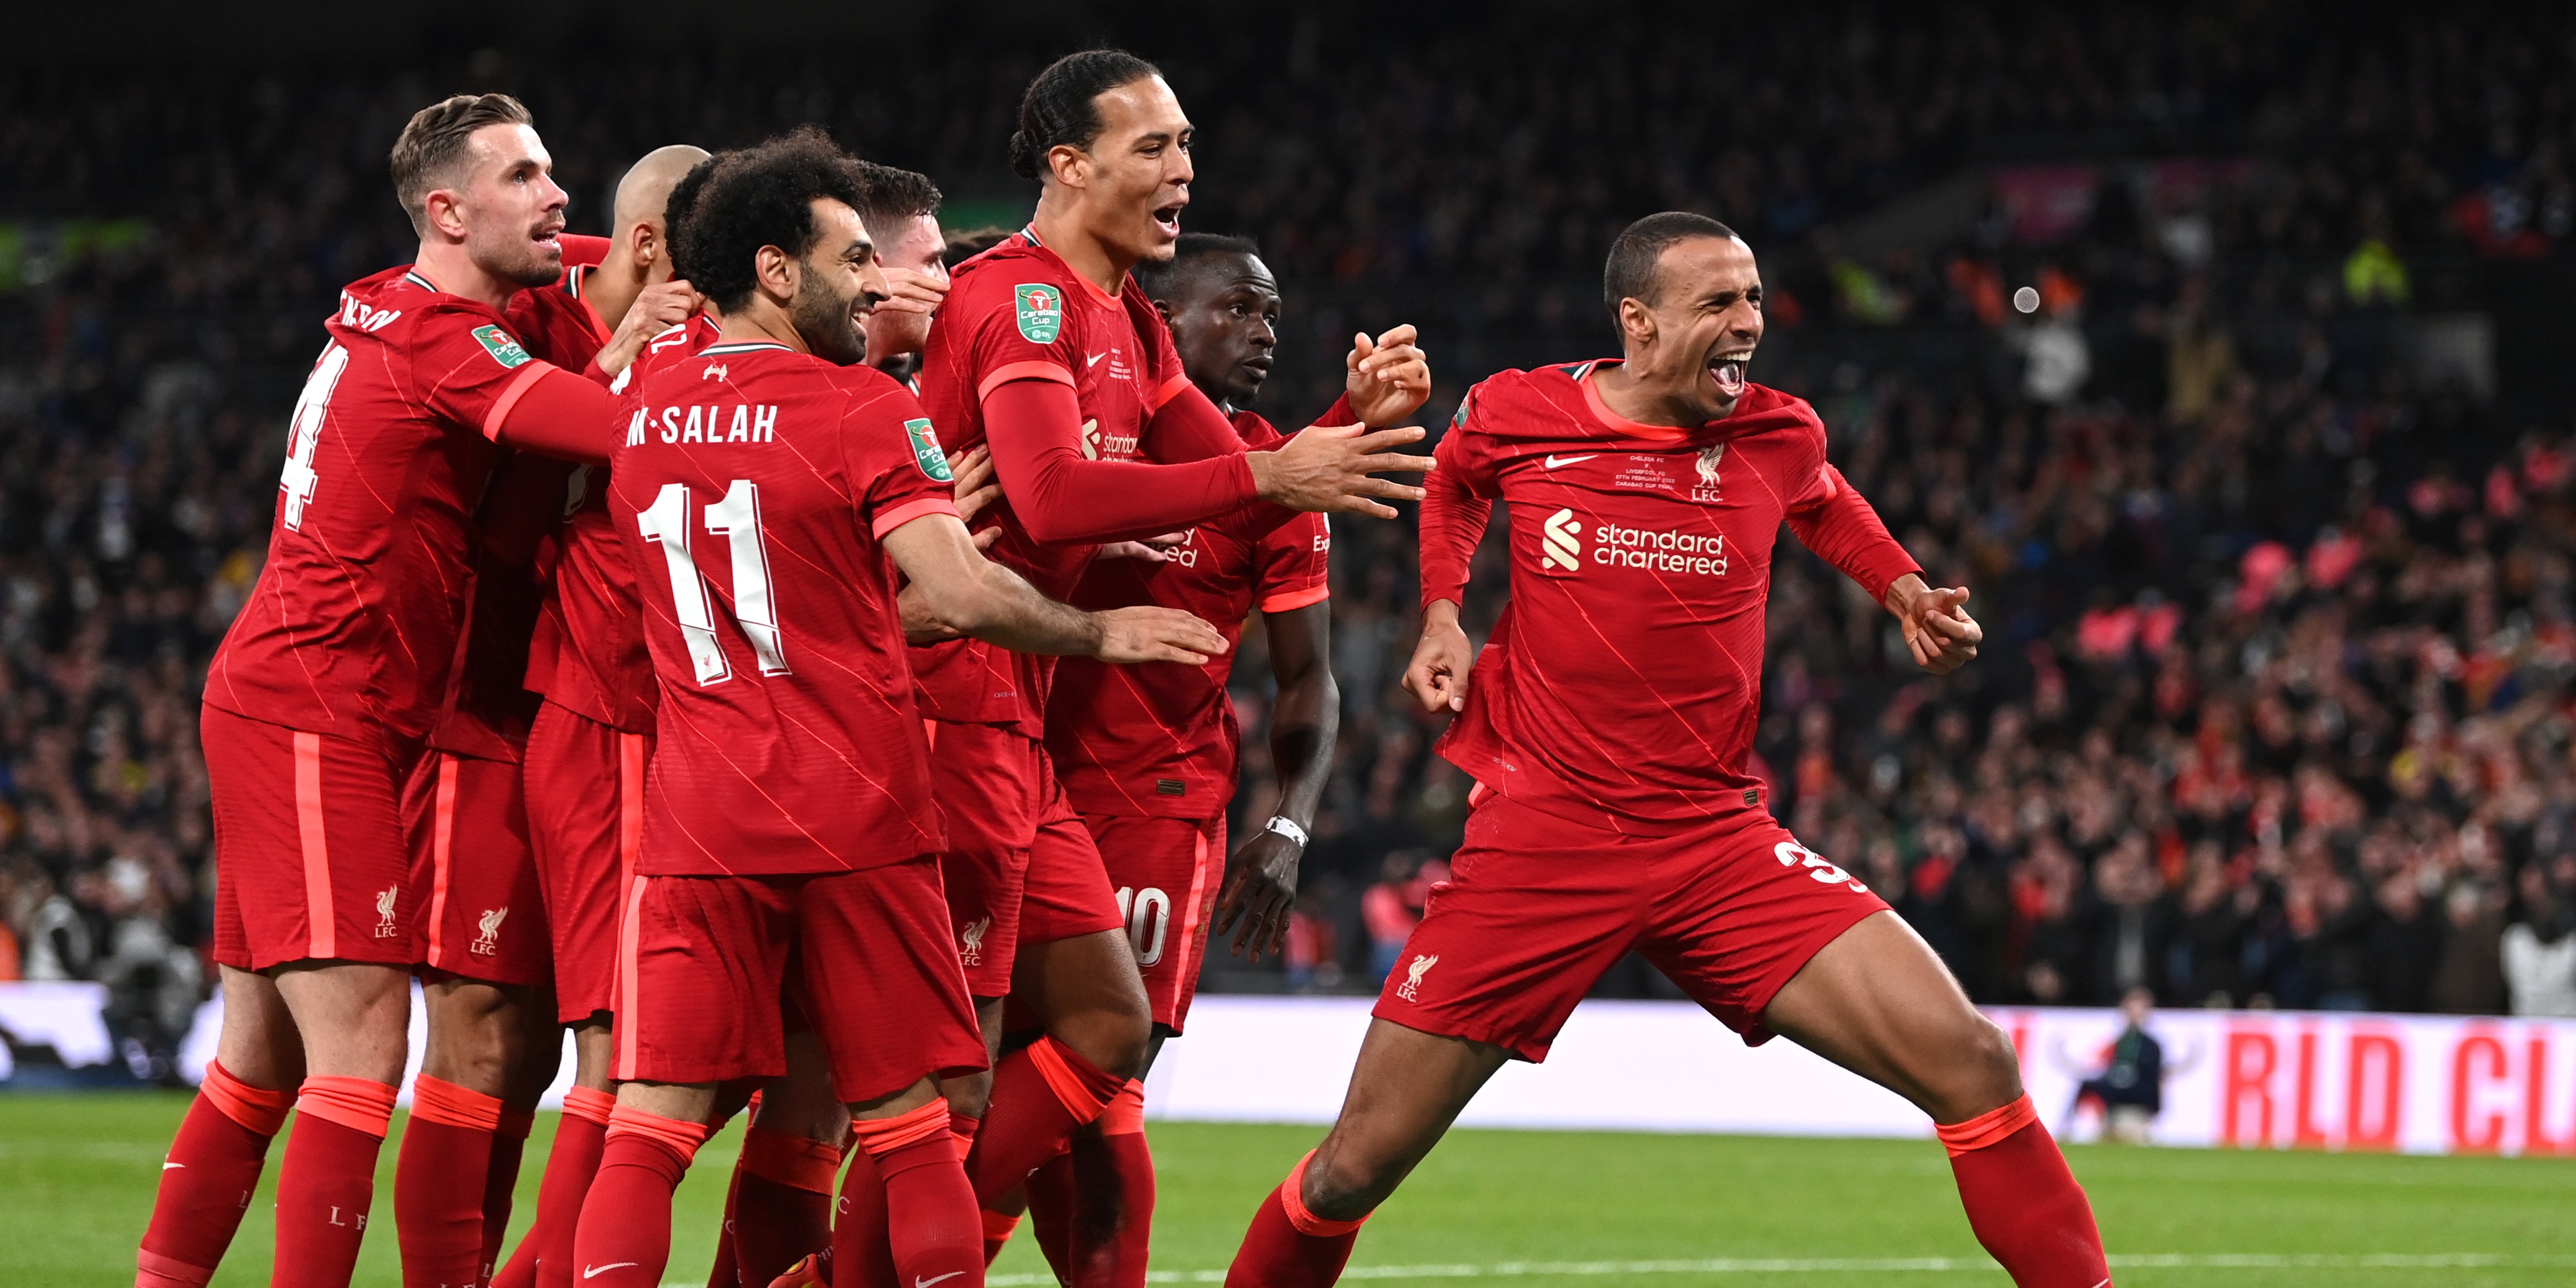 Didi Hamann expresses his joy at watching Liverpool play and discusses the side’s chances of completing a historic quadruple